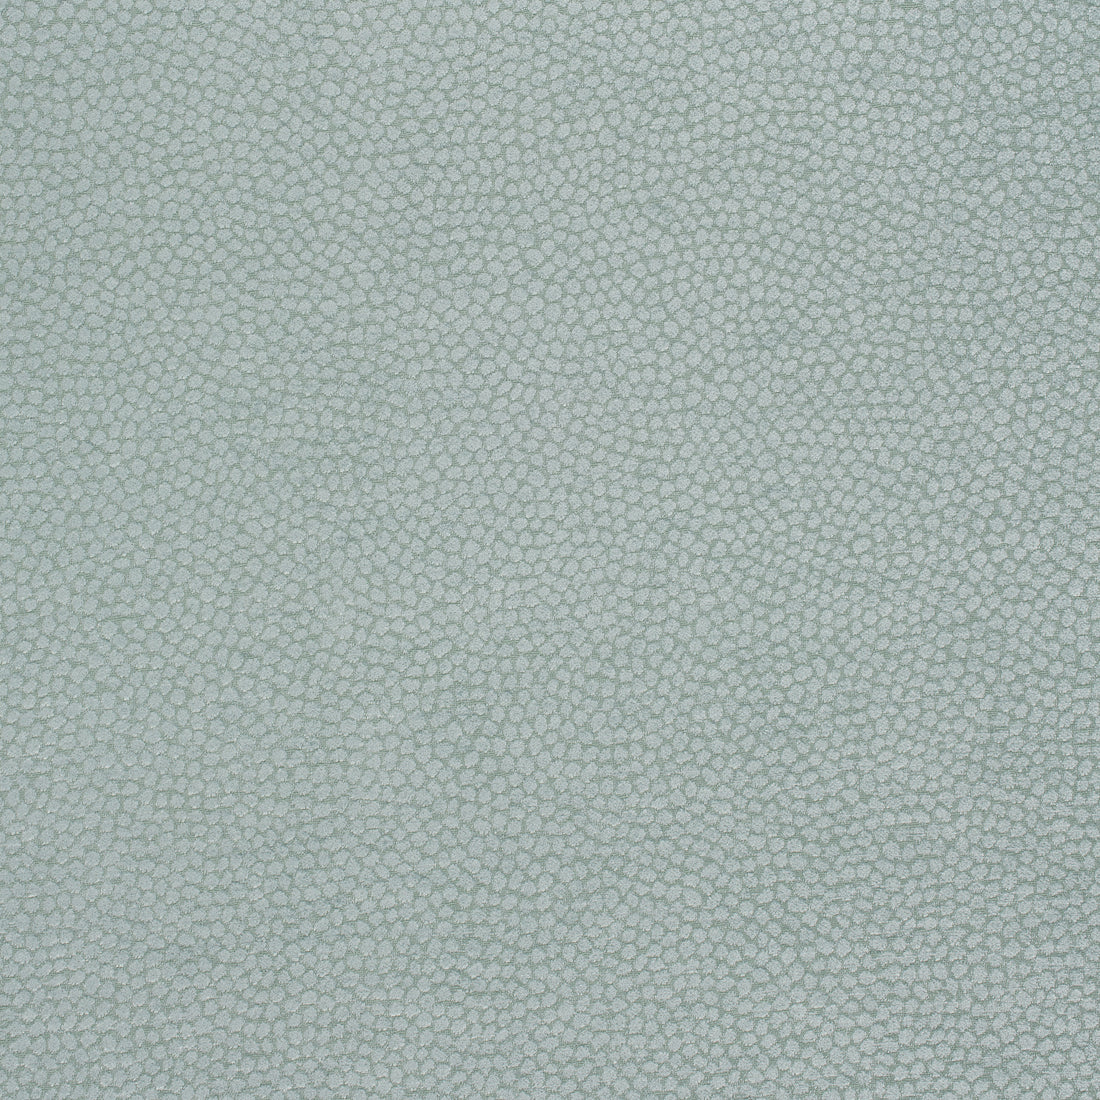 Kali fabric in aqua color - pattern number W80517 - by Thibaut in the Mosaic collection